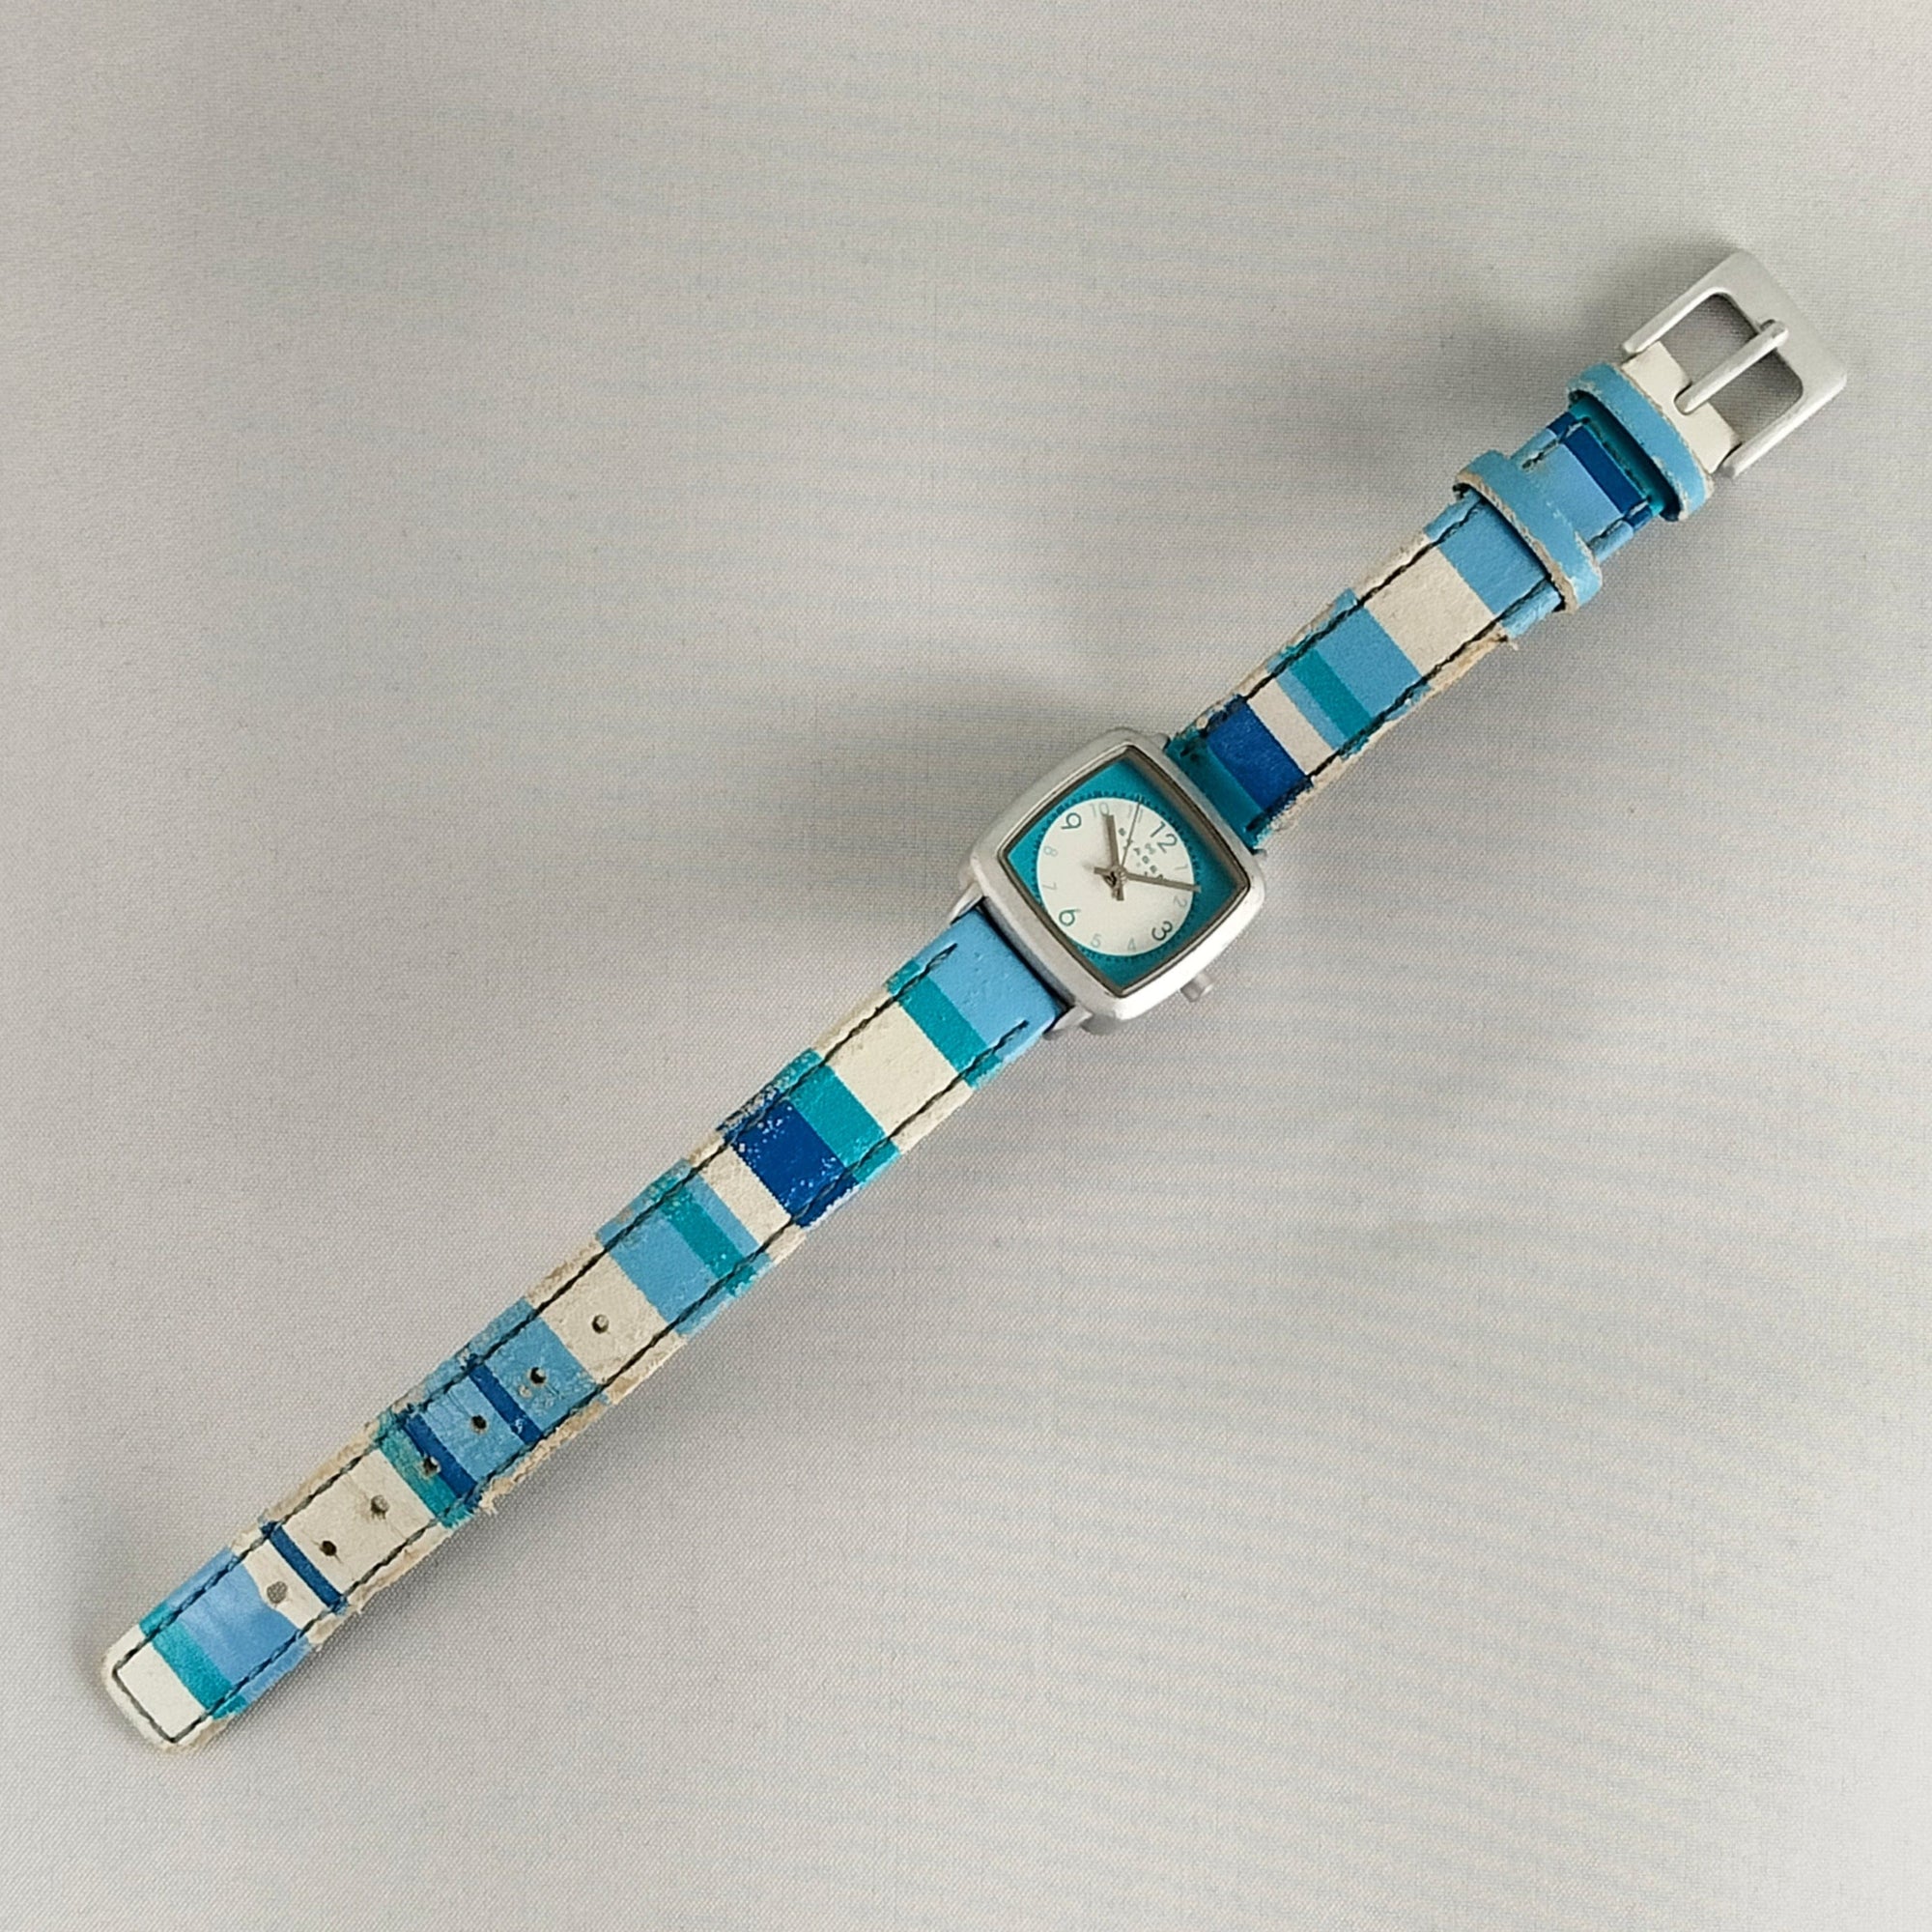 I Like Mikes Mid Century Modern Watches Skagen Women's Stainless Steel Watch, Blue and White Dial, Blue Striped Leather Strap